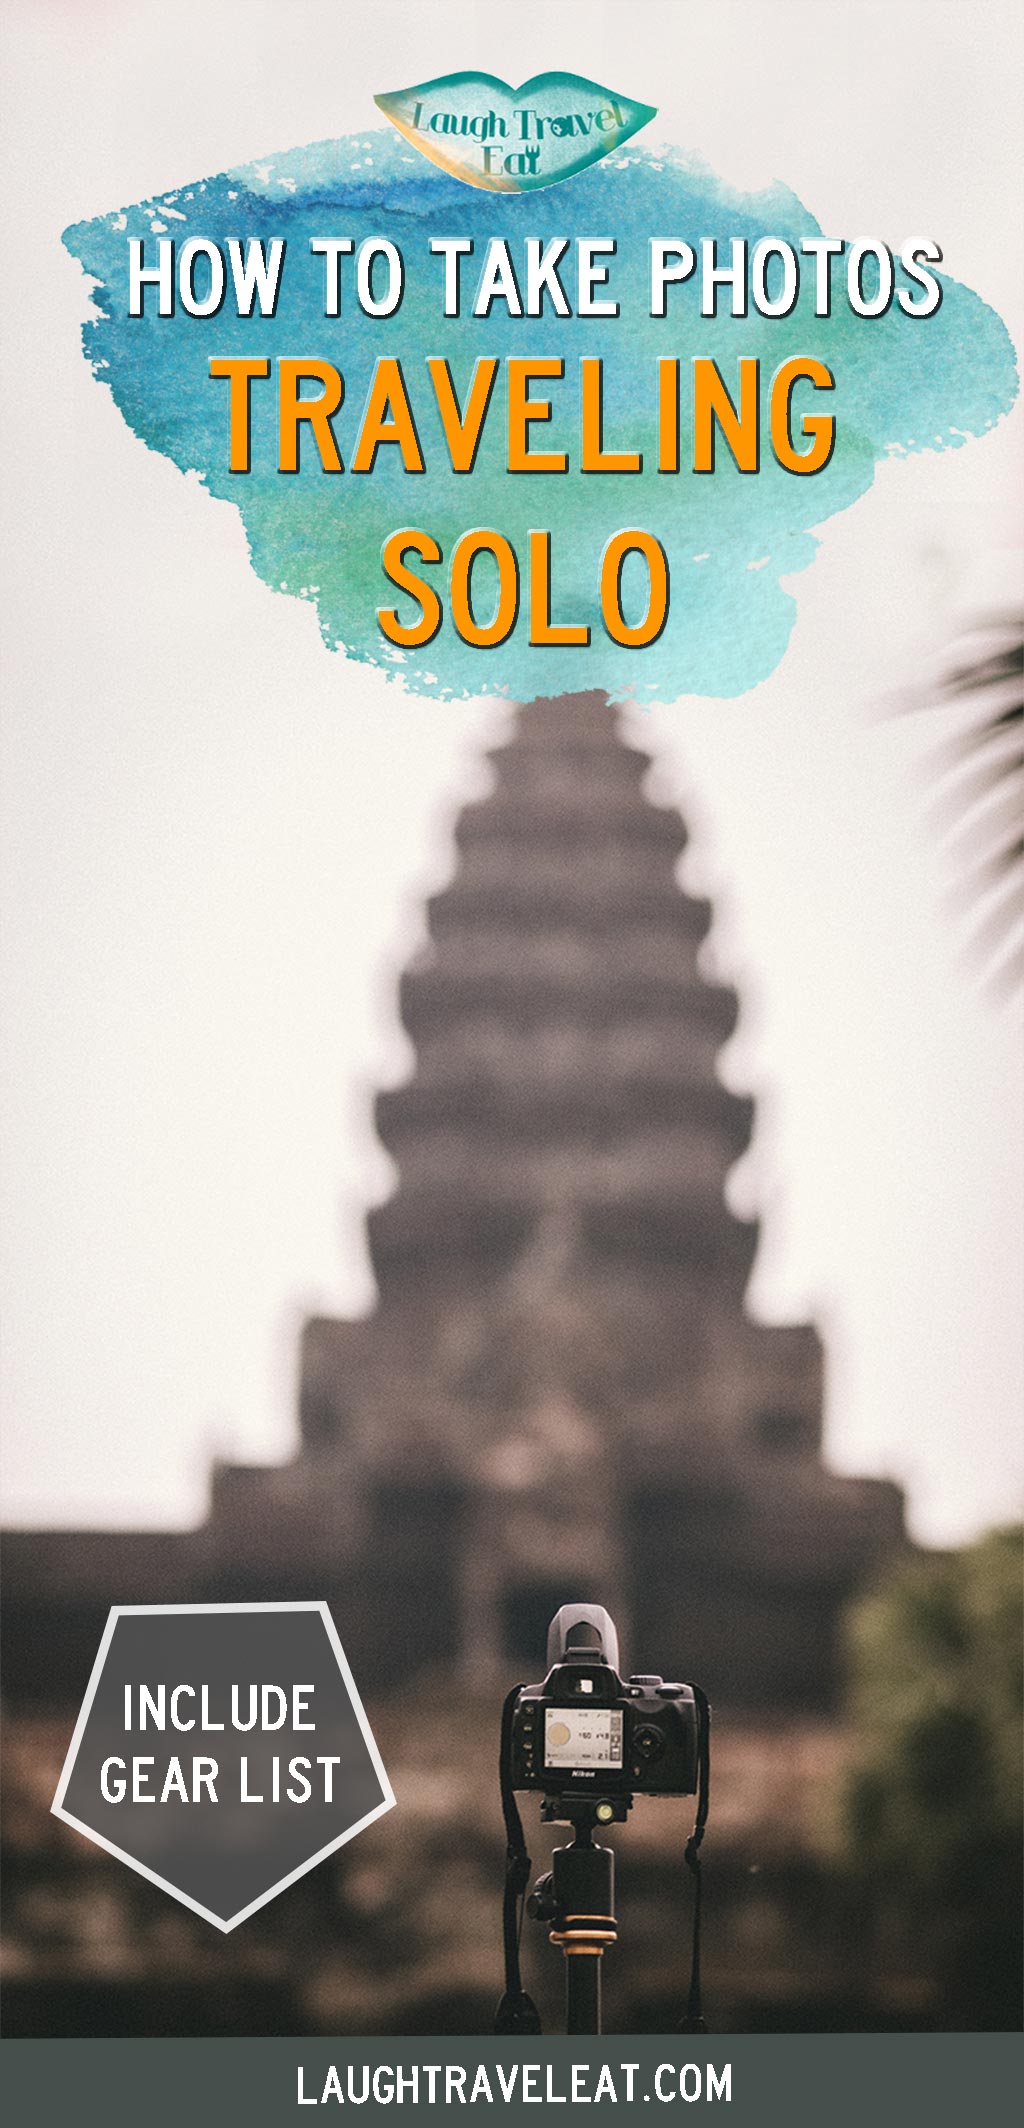 Taking photos when you travel solo is difficult. Aside from asking a stranger, here's how to shoot the best shot by yourself: #solophotography #solo #photos